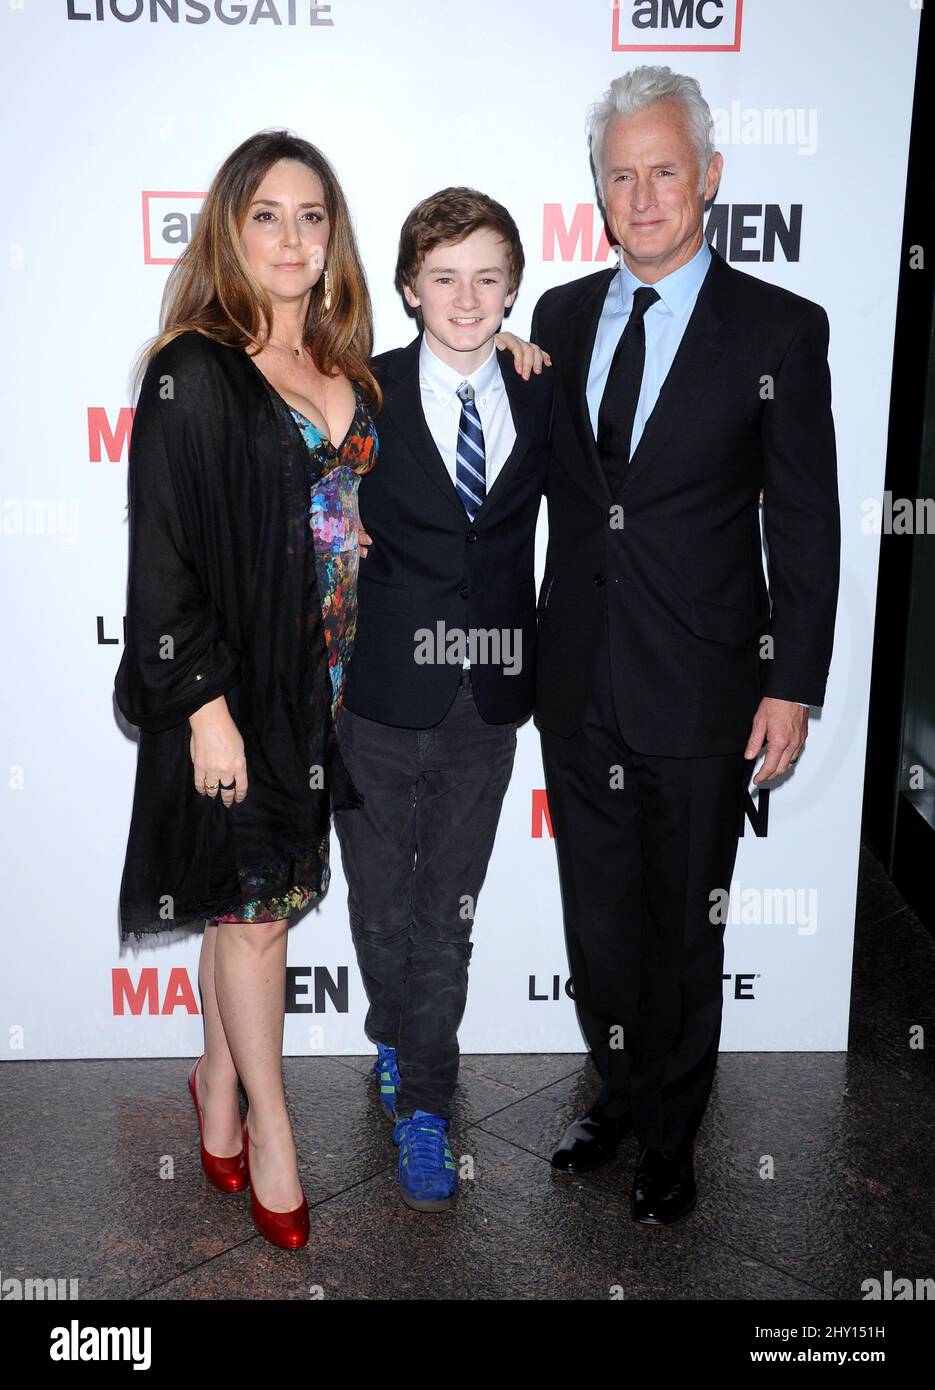 Talia Balsam, Harry Slattery and John Slattery attending a photocall for the premiere of season six of 'Mad Men,' held at the Directors Guild of American Theatre in Los Angeles, California. Stock Photo